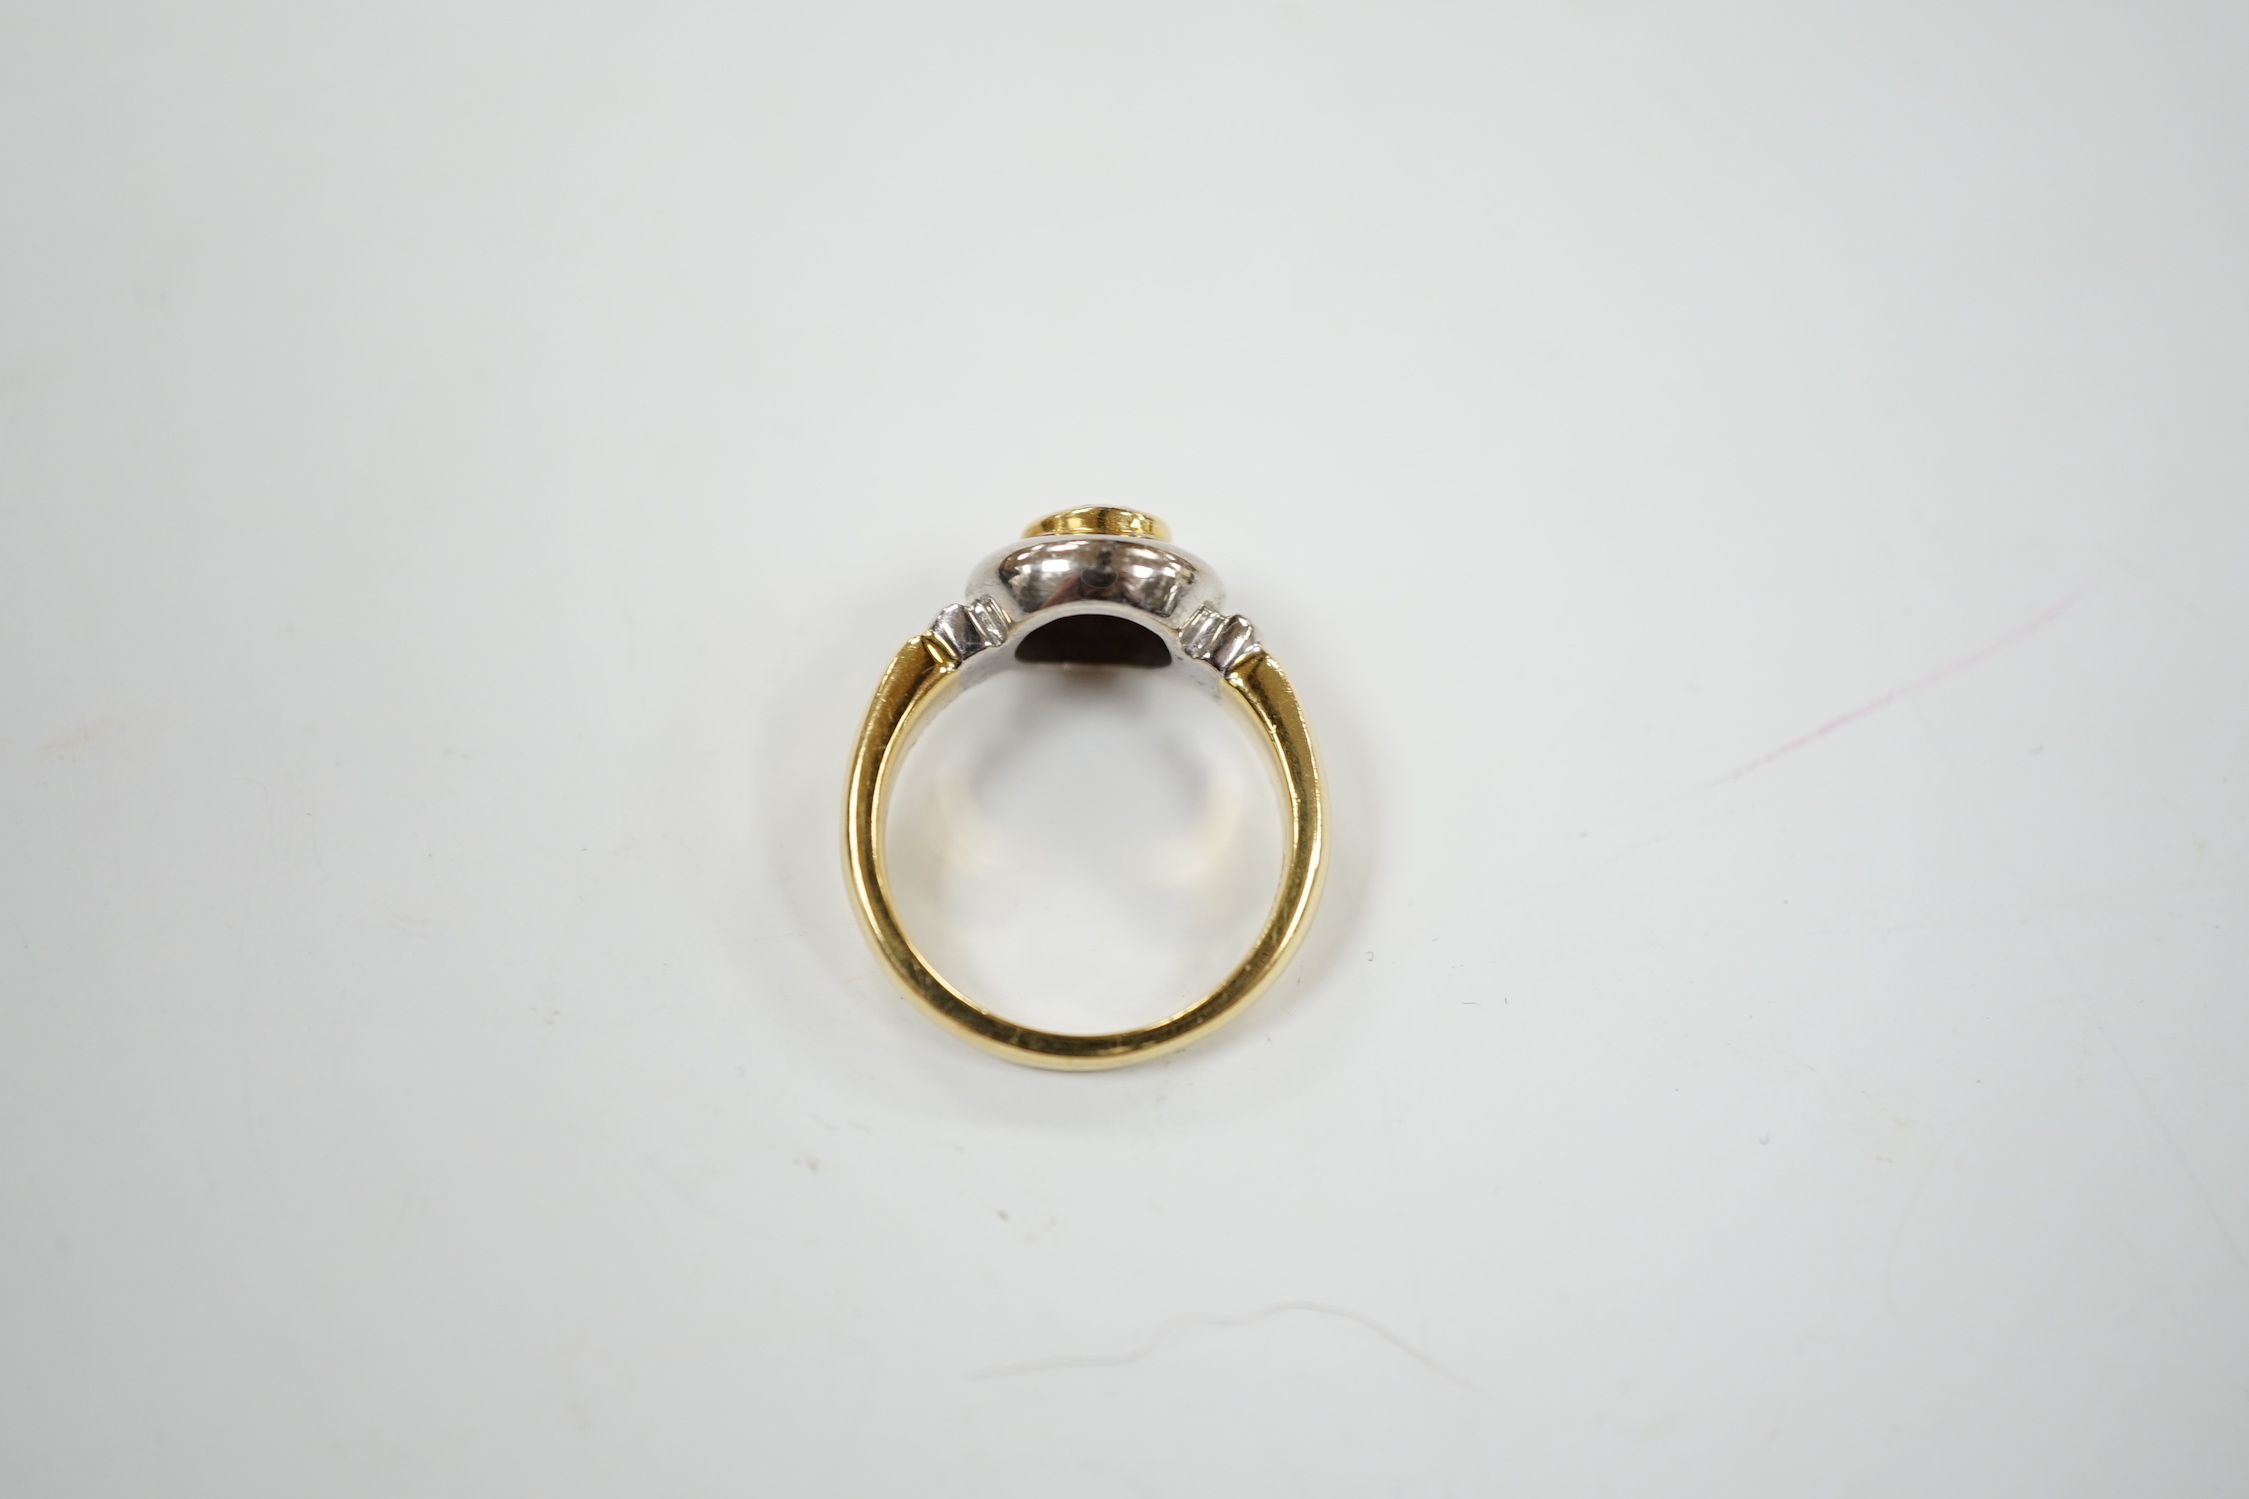 A modern 18ct gold and collet set solitaire diamond ring, with engraving to commemorate the Millenium Dome, the stone weighing 0.40ct, size J, gross weight 6.7 grams.